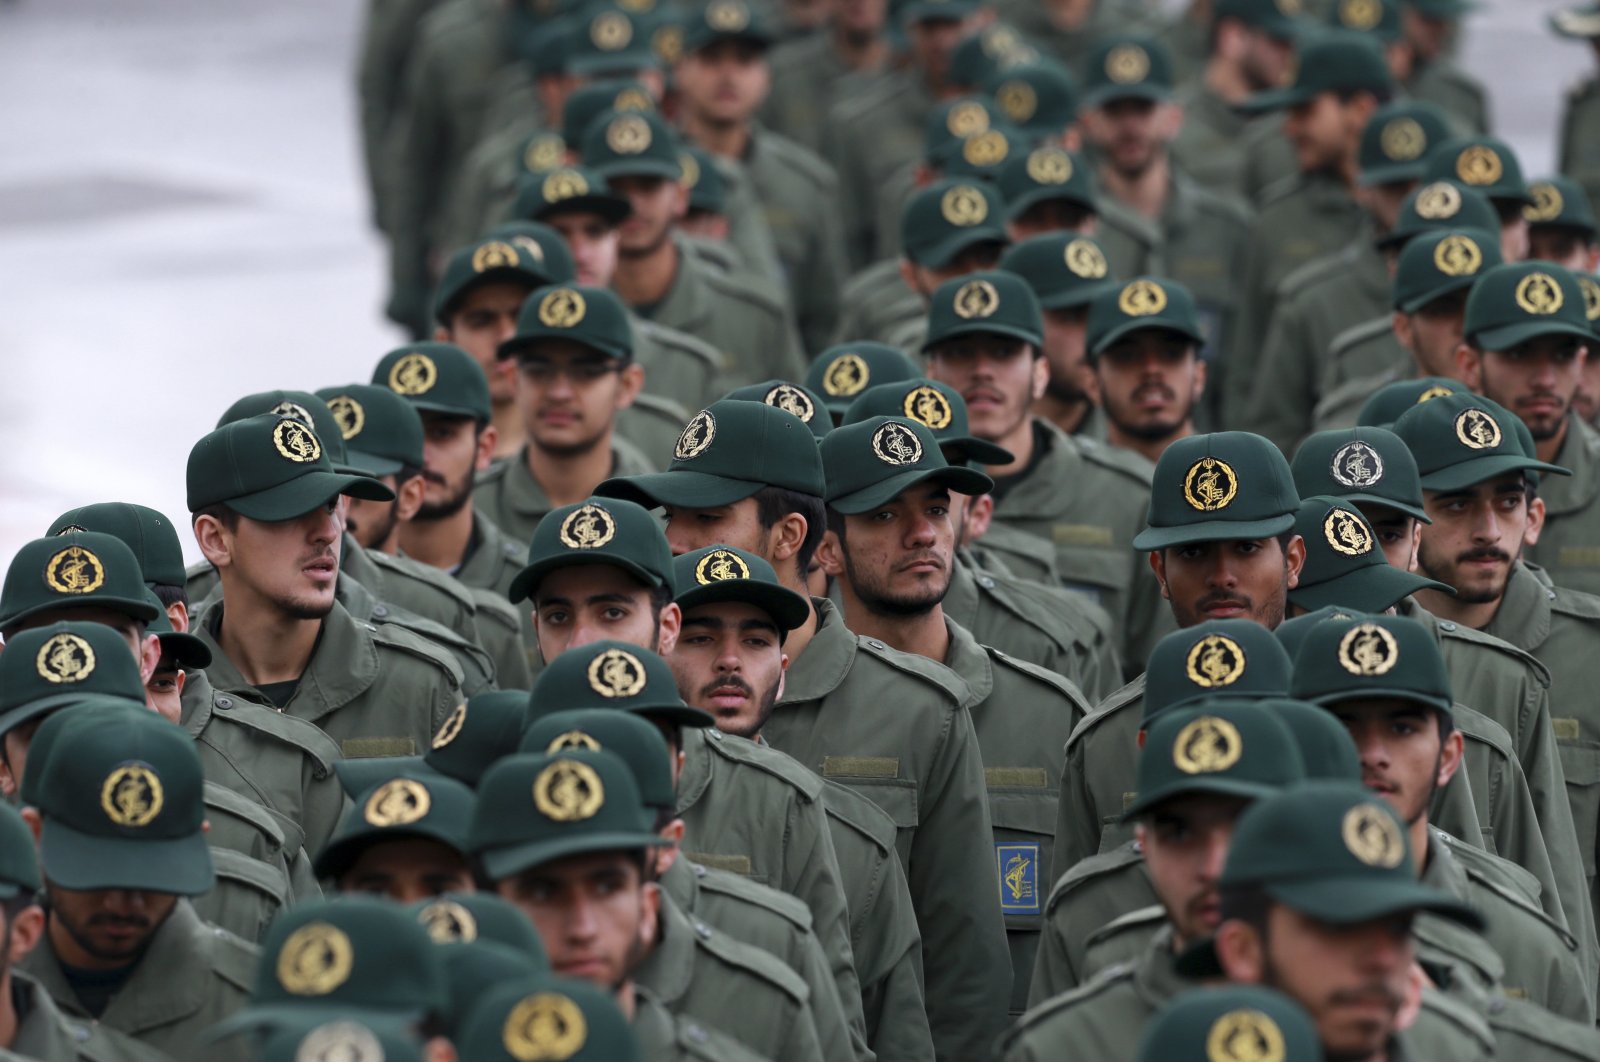 In this Feb, 11, 2019 file photo, Iranian Revolutionary Guard members arrive for a ceremony celebrating the 40th anniversary of the Islamic Revolution, at the Azadi, or Freedom, Square, in Tehran, Iran. (AP Photo)